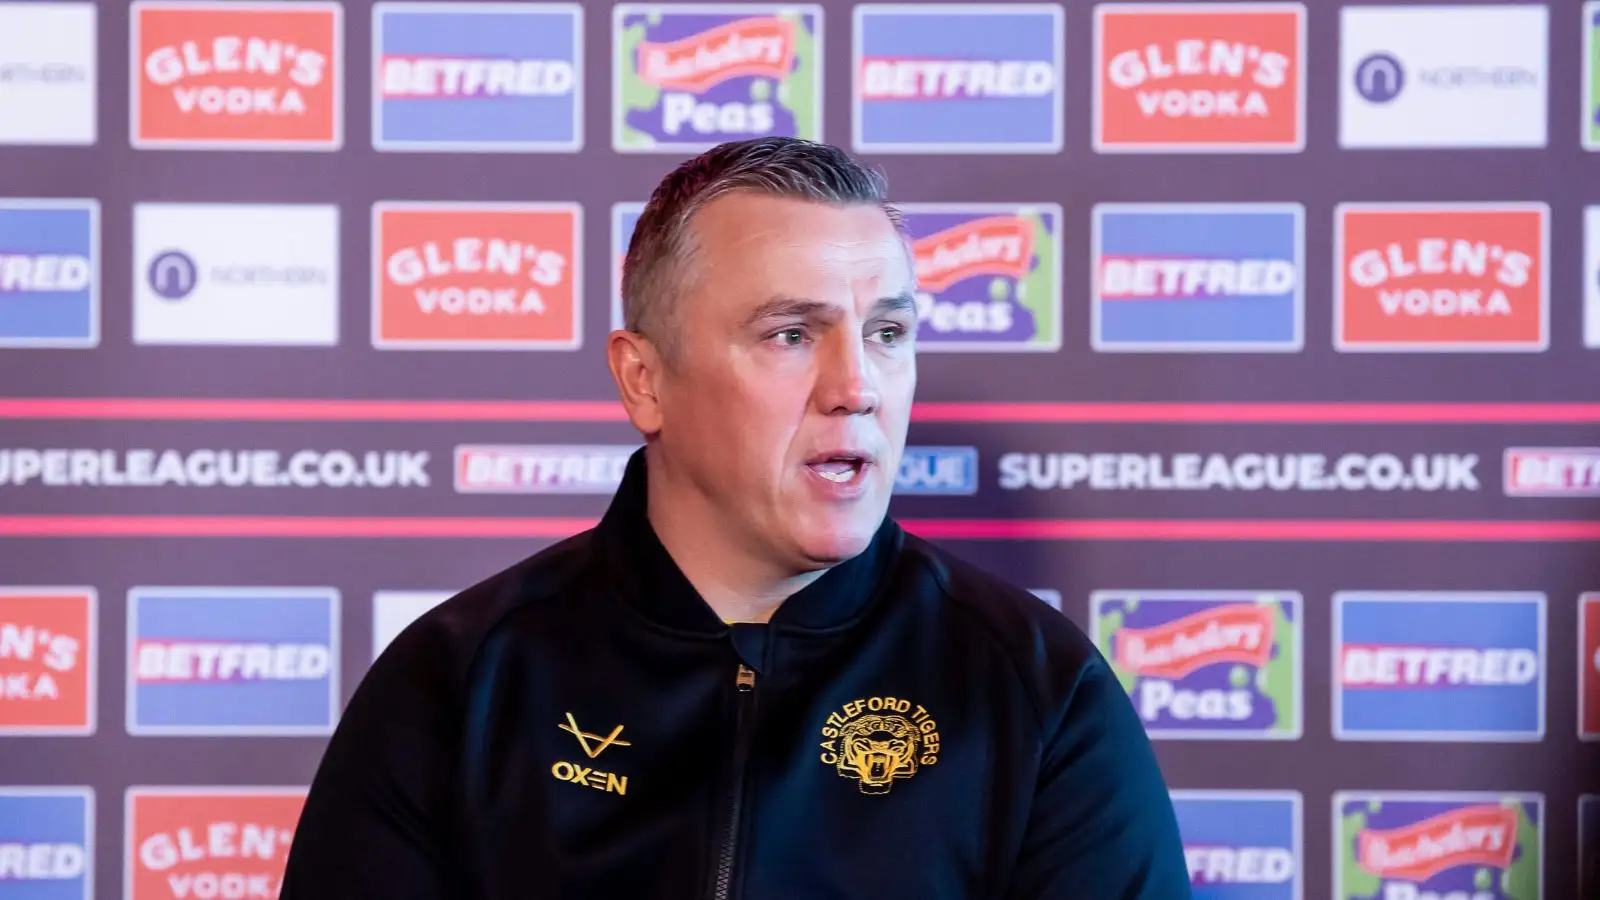 “50/50” – Andy Last preparing for Castleford interview fresh from Salford defeat